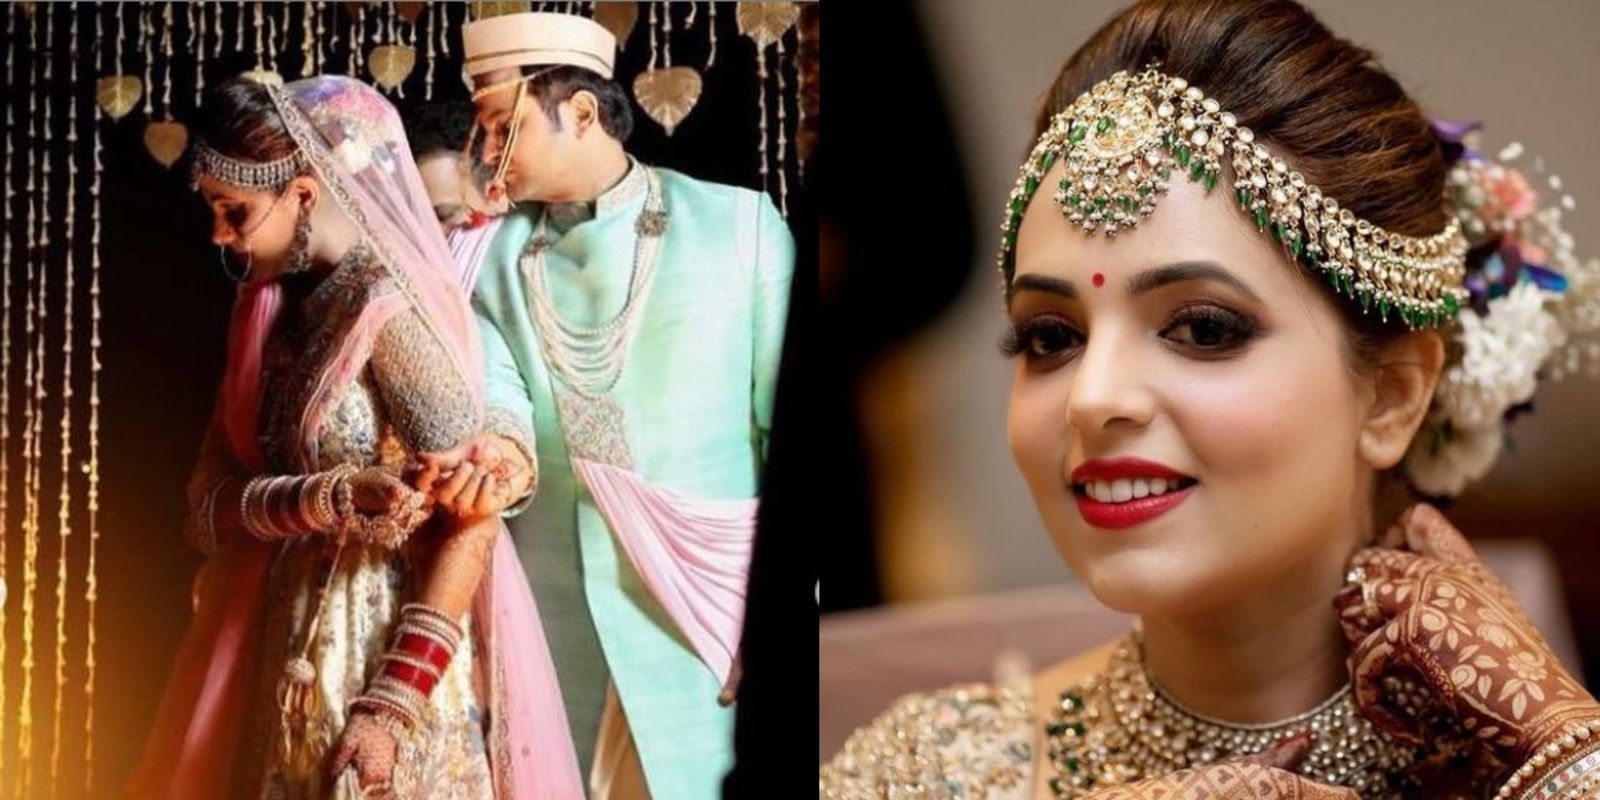 Sugandha Mishra Aka Mrs. Bhosale Shares New Pictures From Her Wedding With Sanket Bhosale